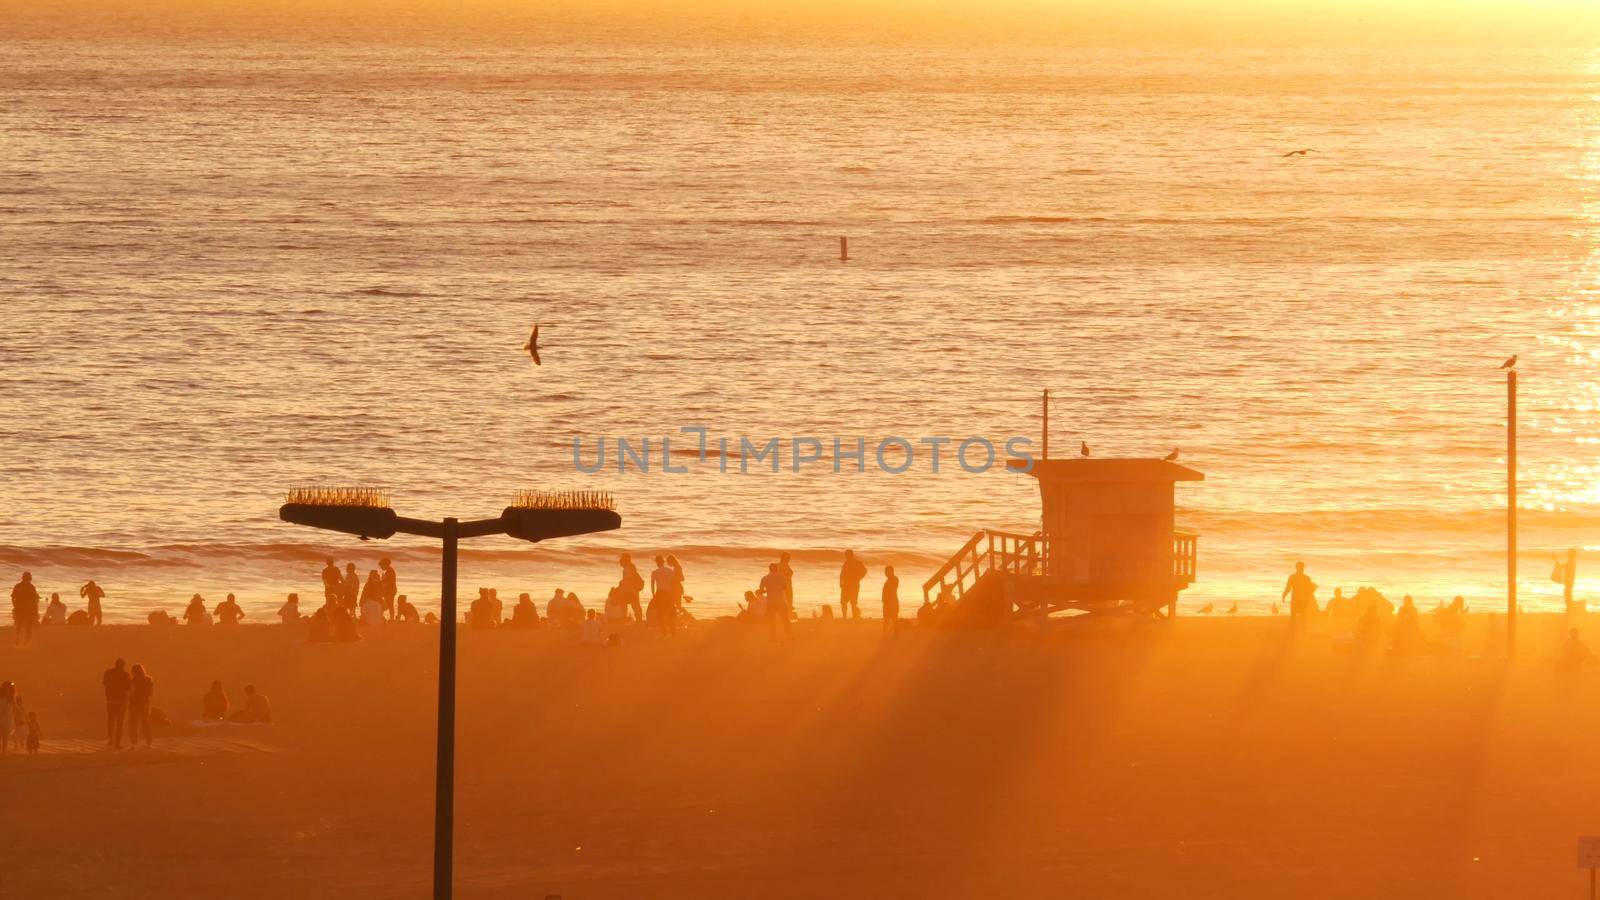 SANTA MONICA, LOS ANGELES, USA - 28 OCT 2019: California summertime beach aesthetic, atmospheric golden sunset. Unrecognizable people silhouettes, sun rays over pacific ocean waves. Lifeguard tower by DogoraSun